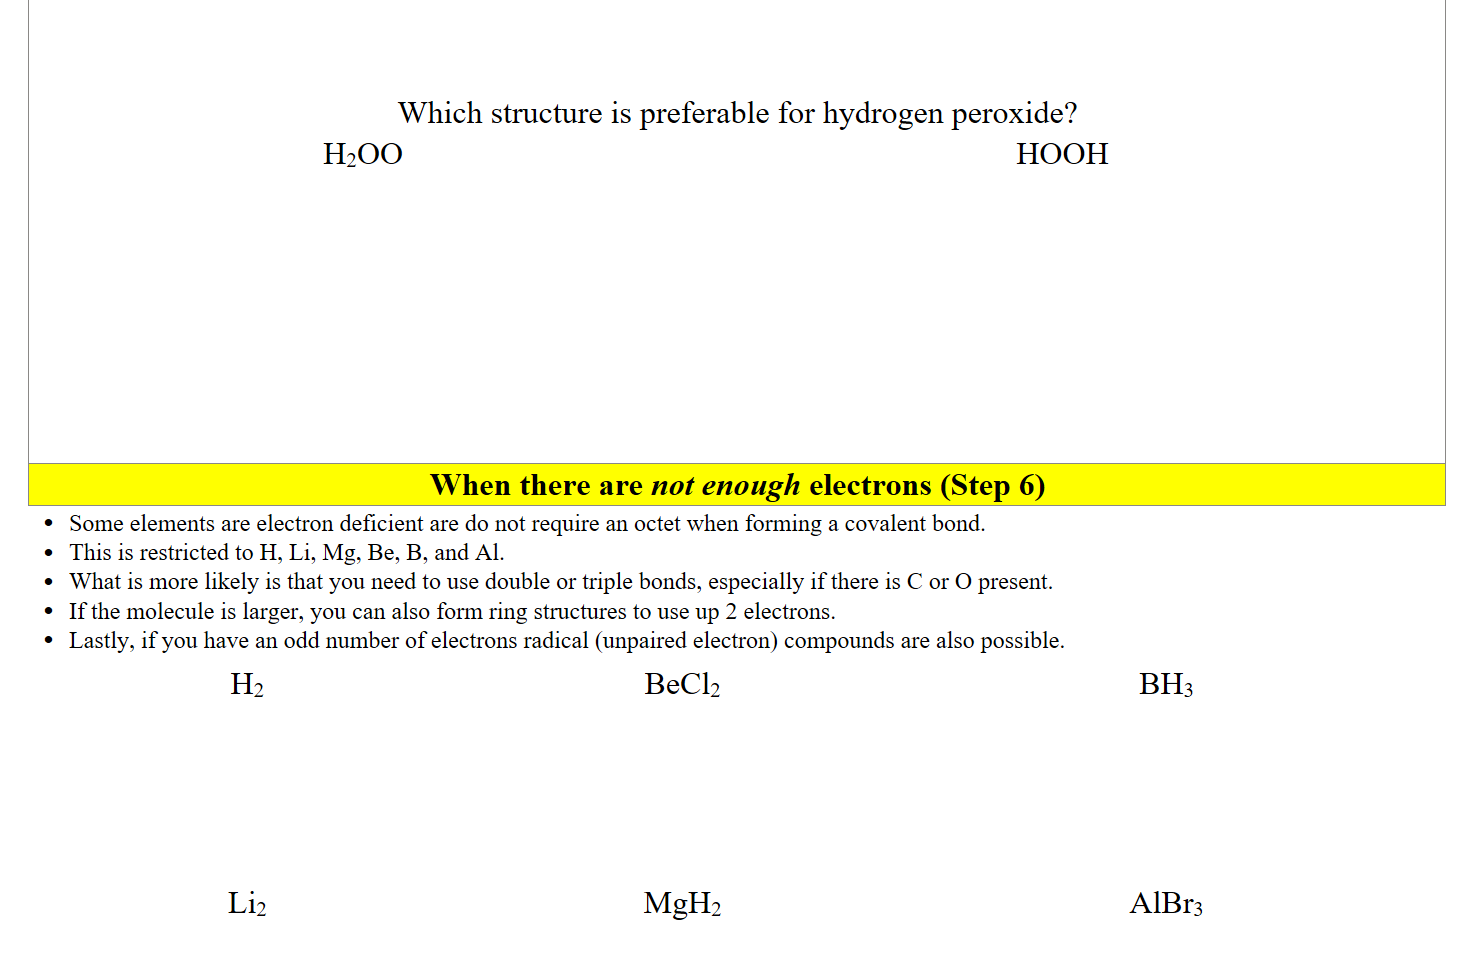 


Which structure is preferable for hydrogen peroxide?
H2OO








HOOH
When there are not enough electrons (Step 6)
Some elements are electron deficient are do not require an octet when forming a covalent bond. 
This is restricted to H, Li, Mg, Be, B, and Al.
What is more likely is that you need to use double or triple bonds, especially if there is C or O present.
If the molecule is larger, you can also form ring structures to use up 2 electrons.
Lastly, if you have an odd number of electrons radical (unpaired electron) compounds are also possible.
H2 





Li2 


BeCl2





MgH2


BH3





AlBr3


